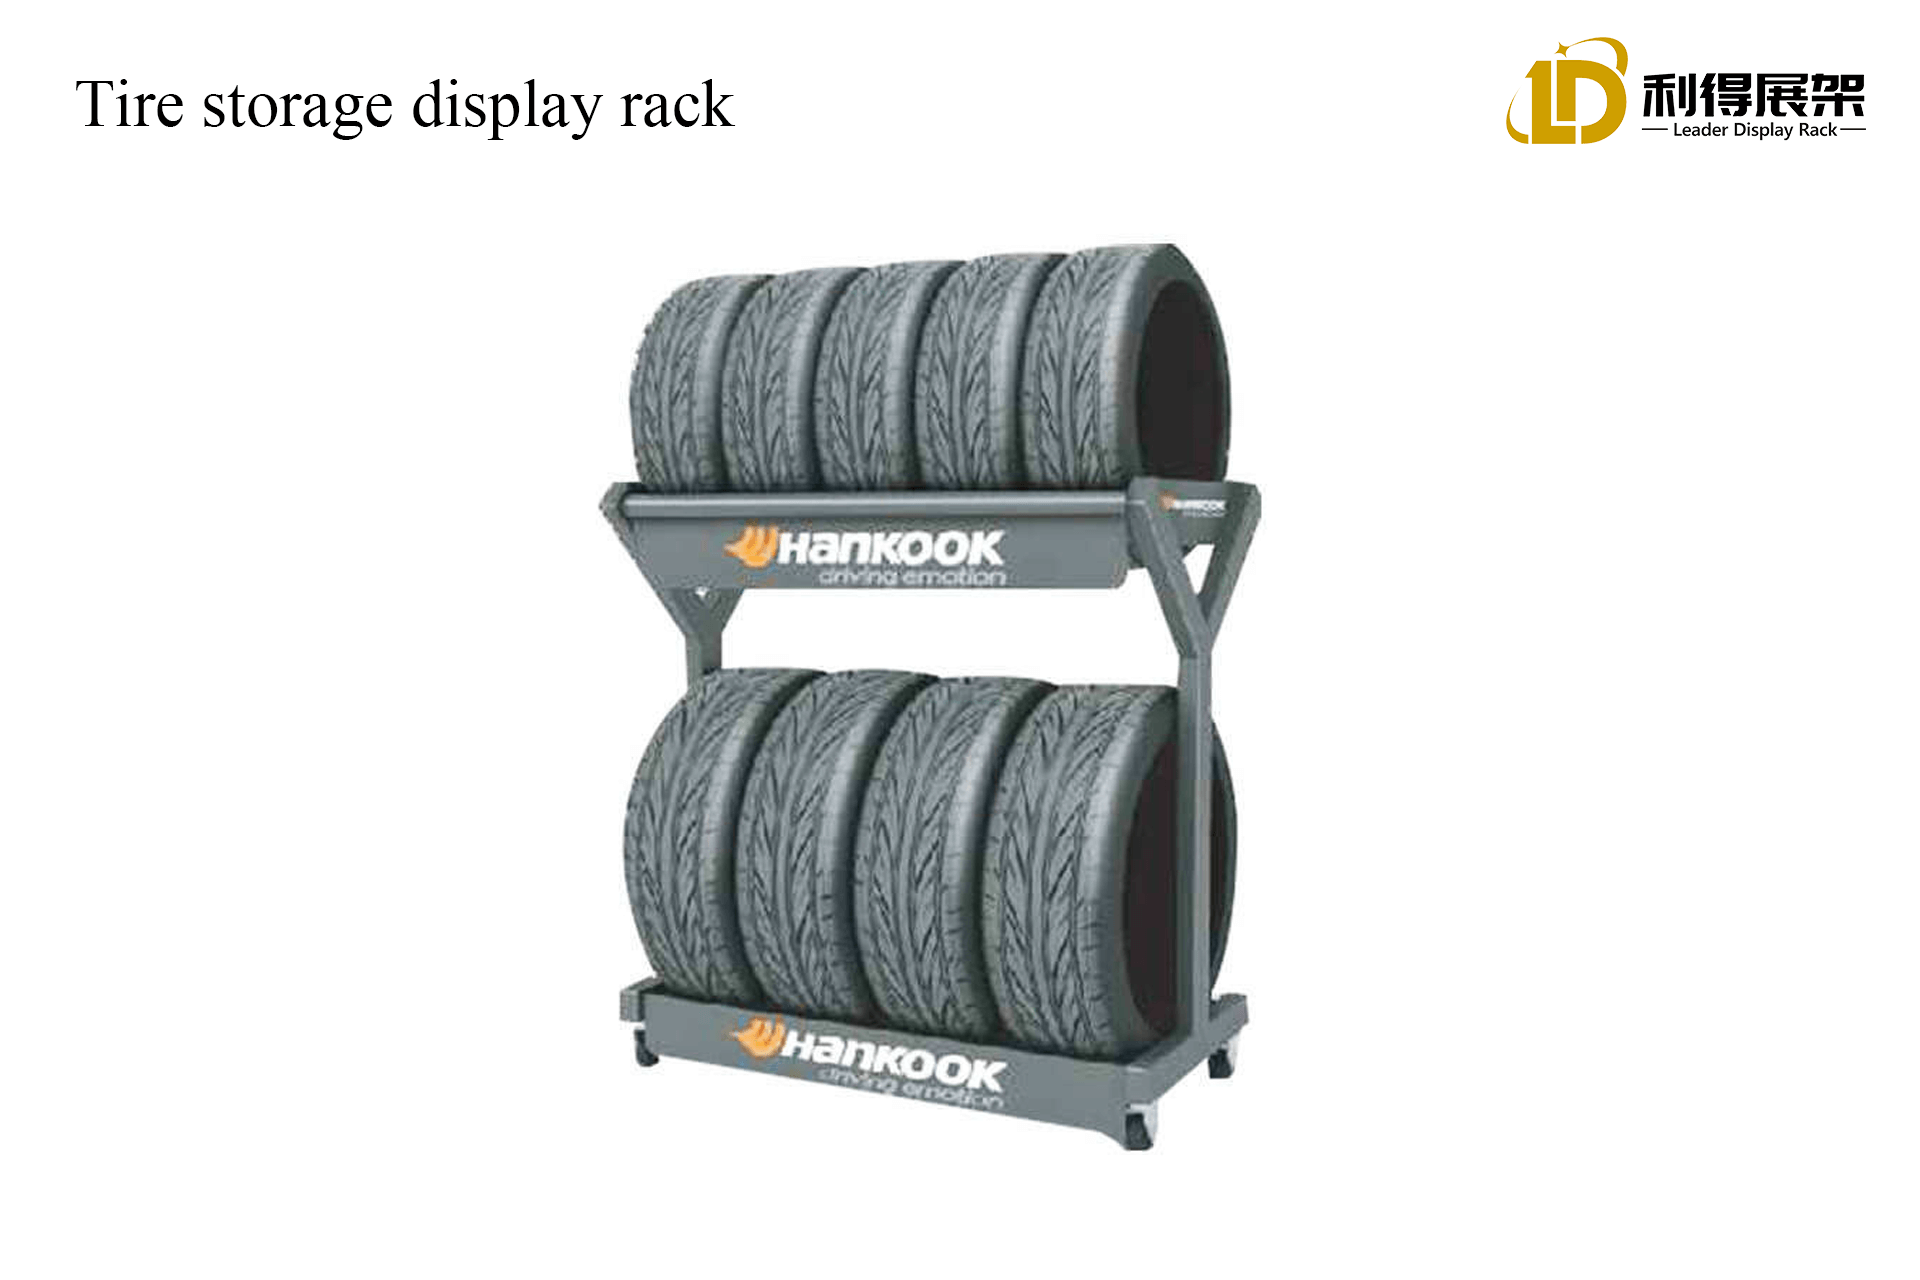 Brand selection, automotive tire storage display rack selection guide